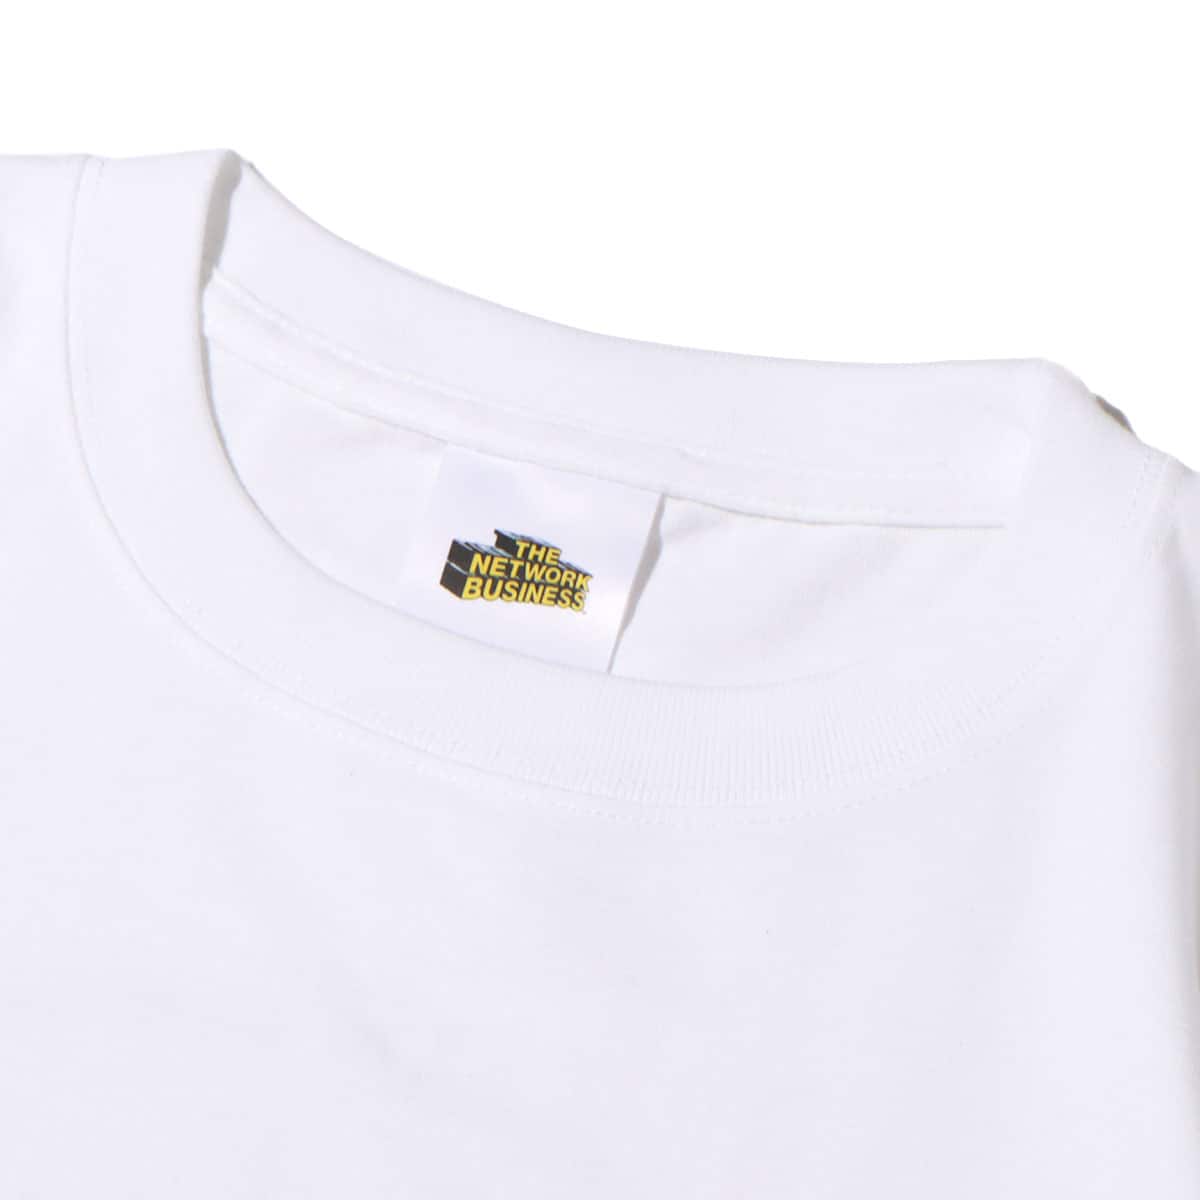 THE NETWORK BUSINESS x SAPEur DETROIT TEE WHITE 22SU-I